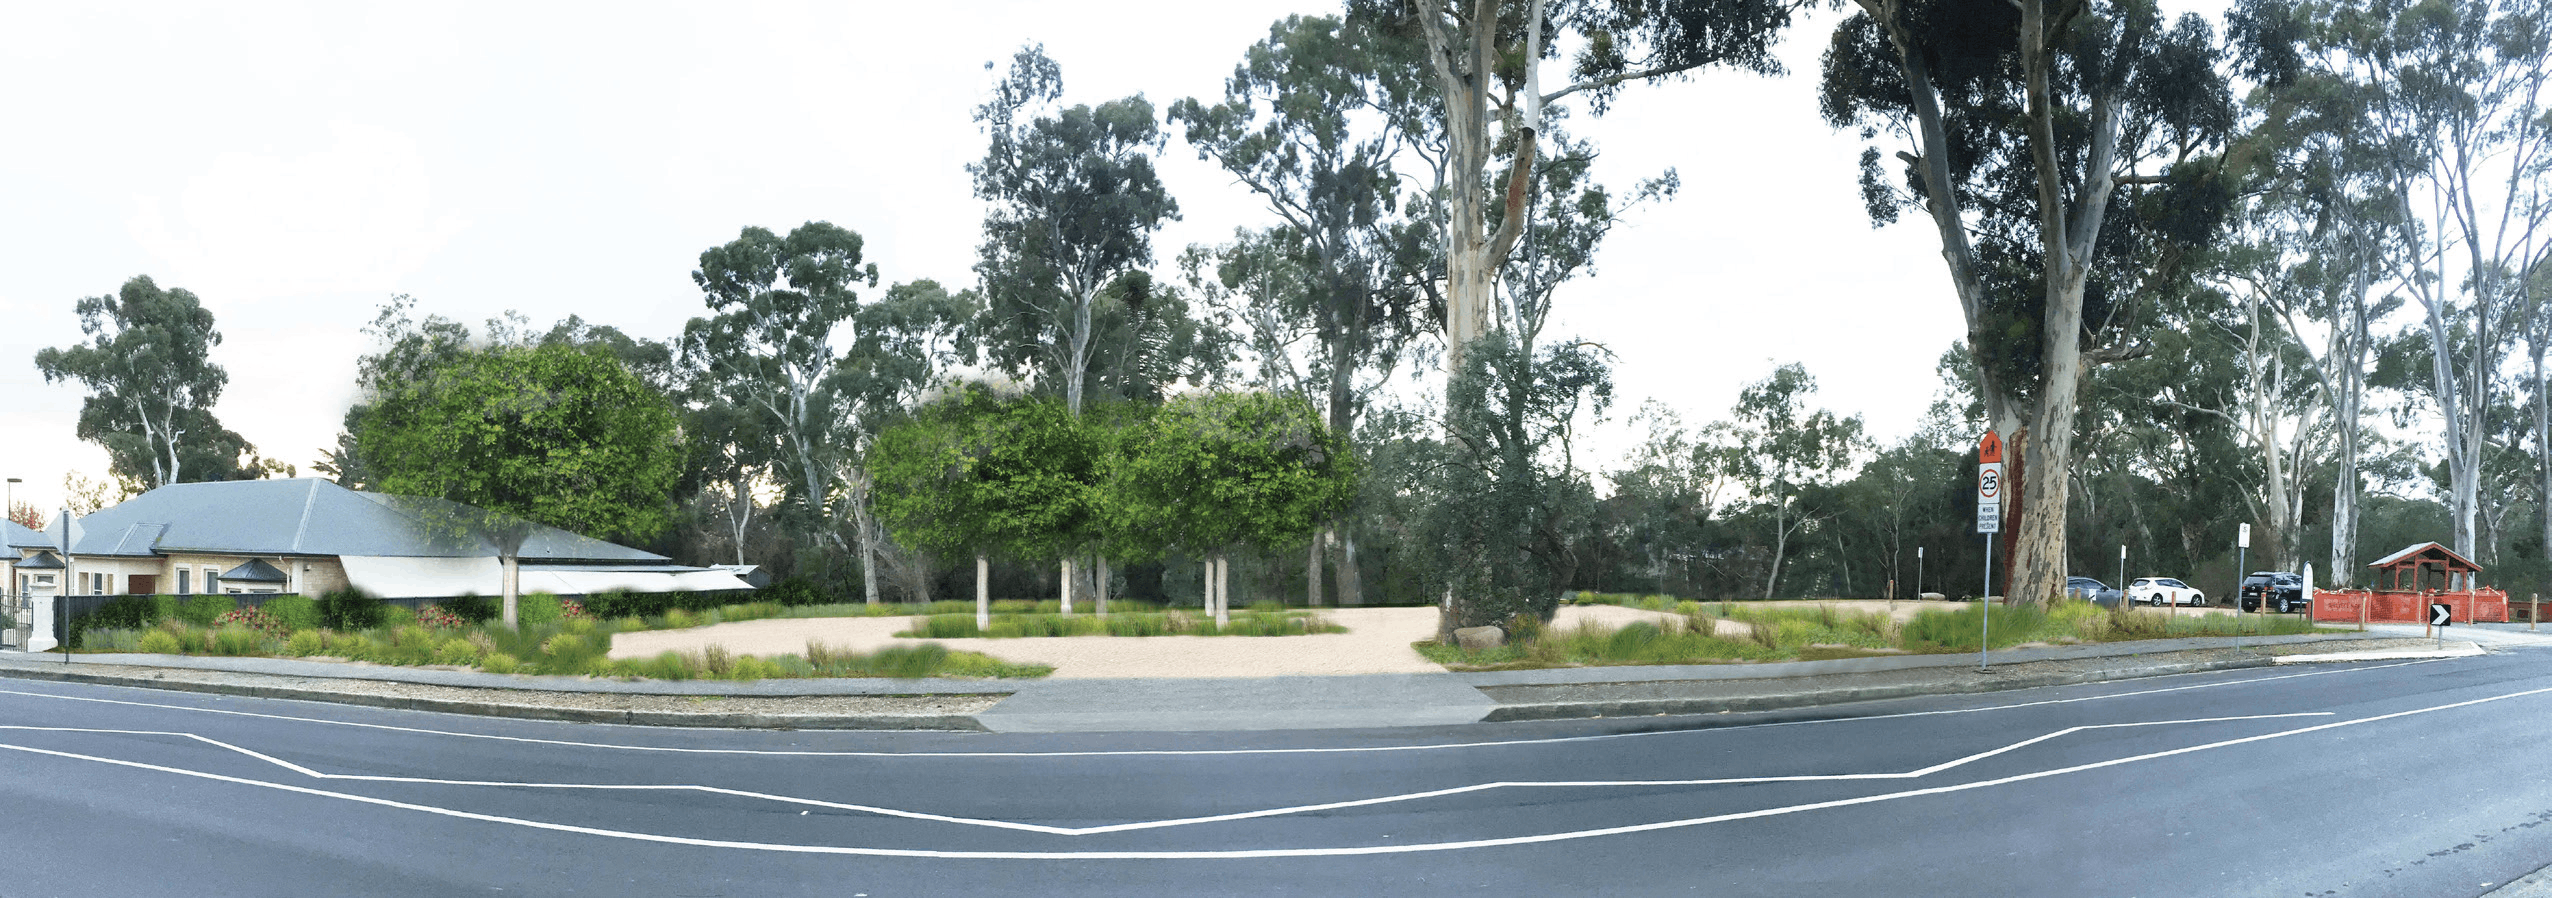 Artists impression of the expanded and improved public car park off Stonyfell Drive, Wattle Park